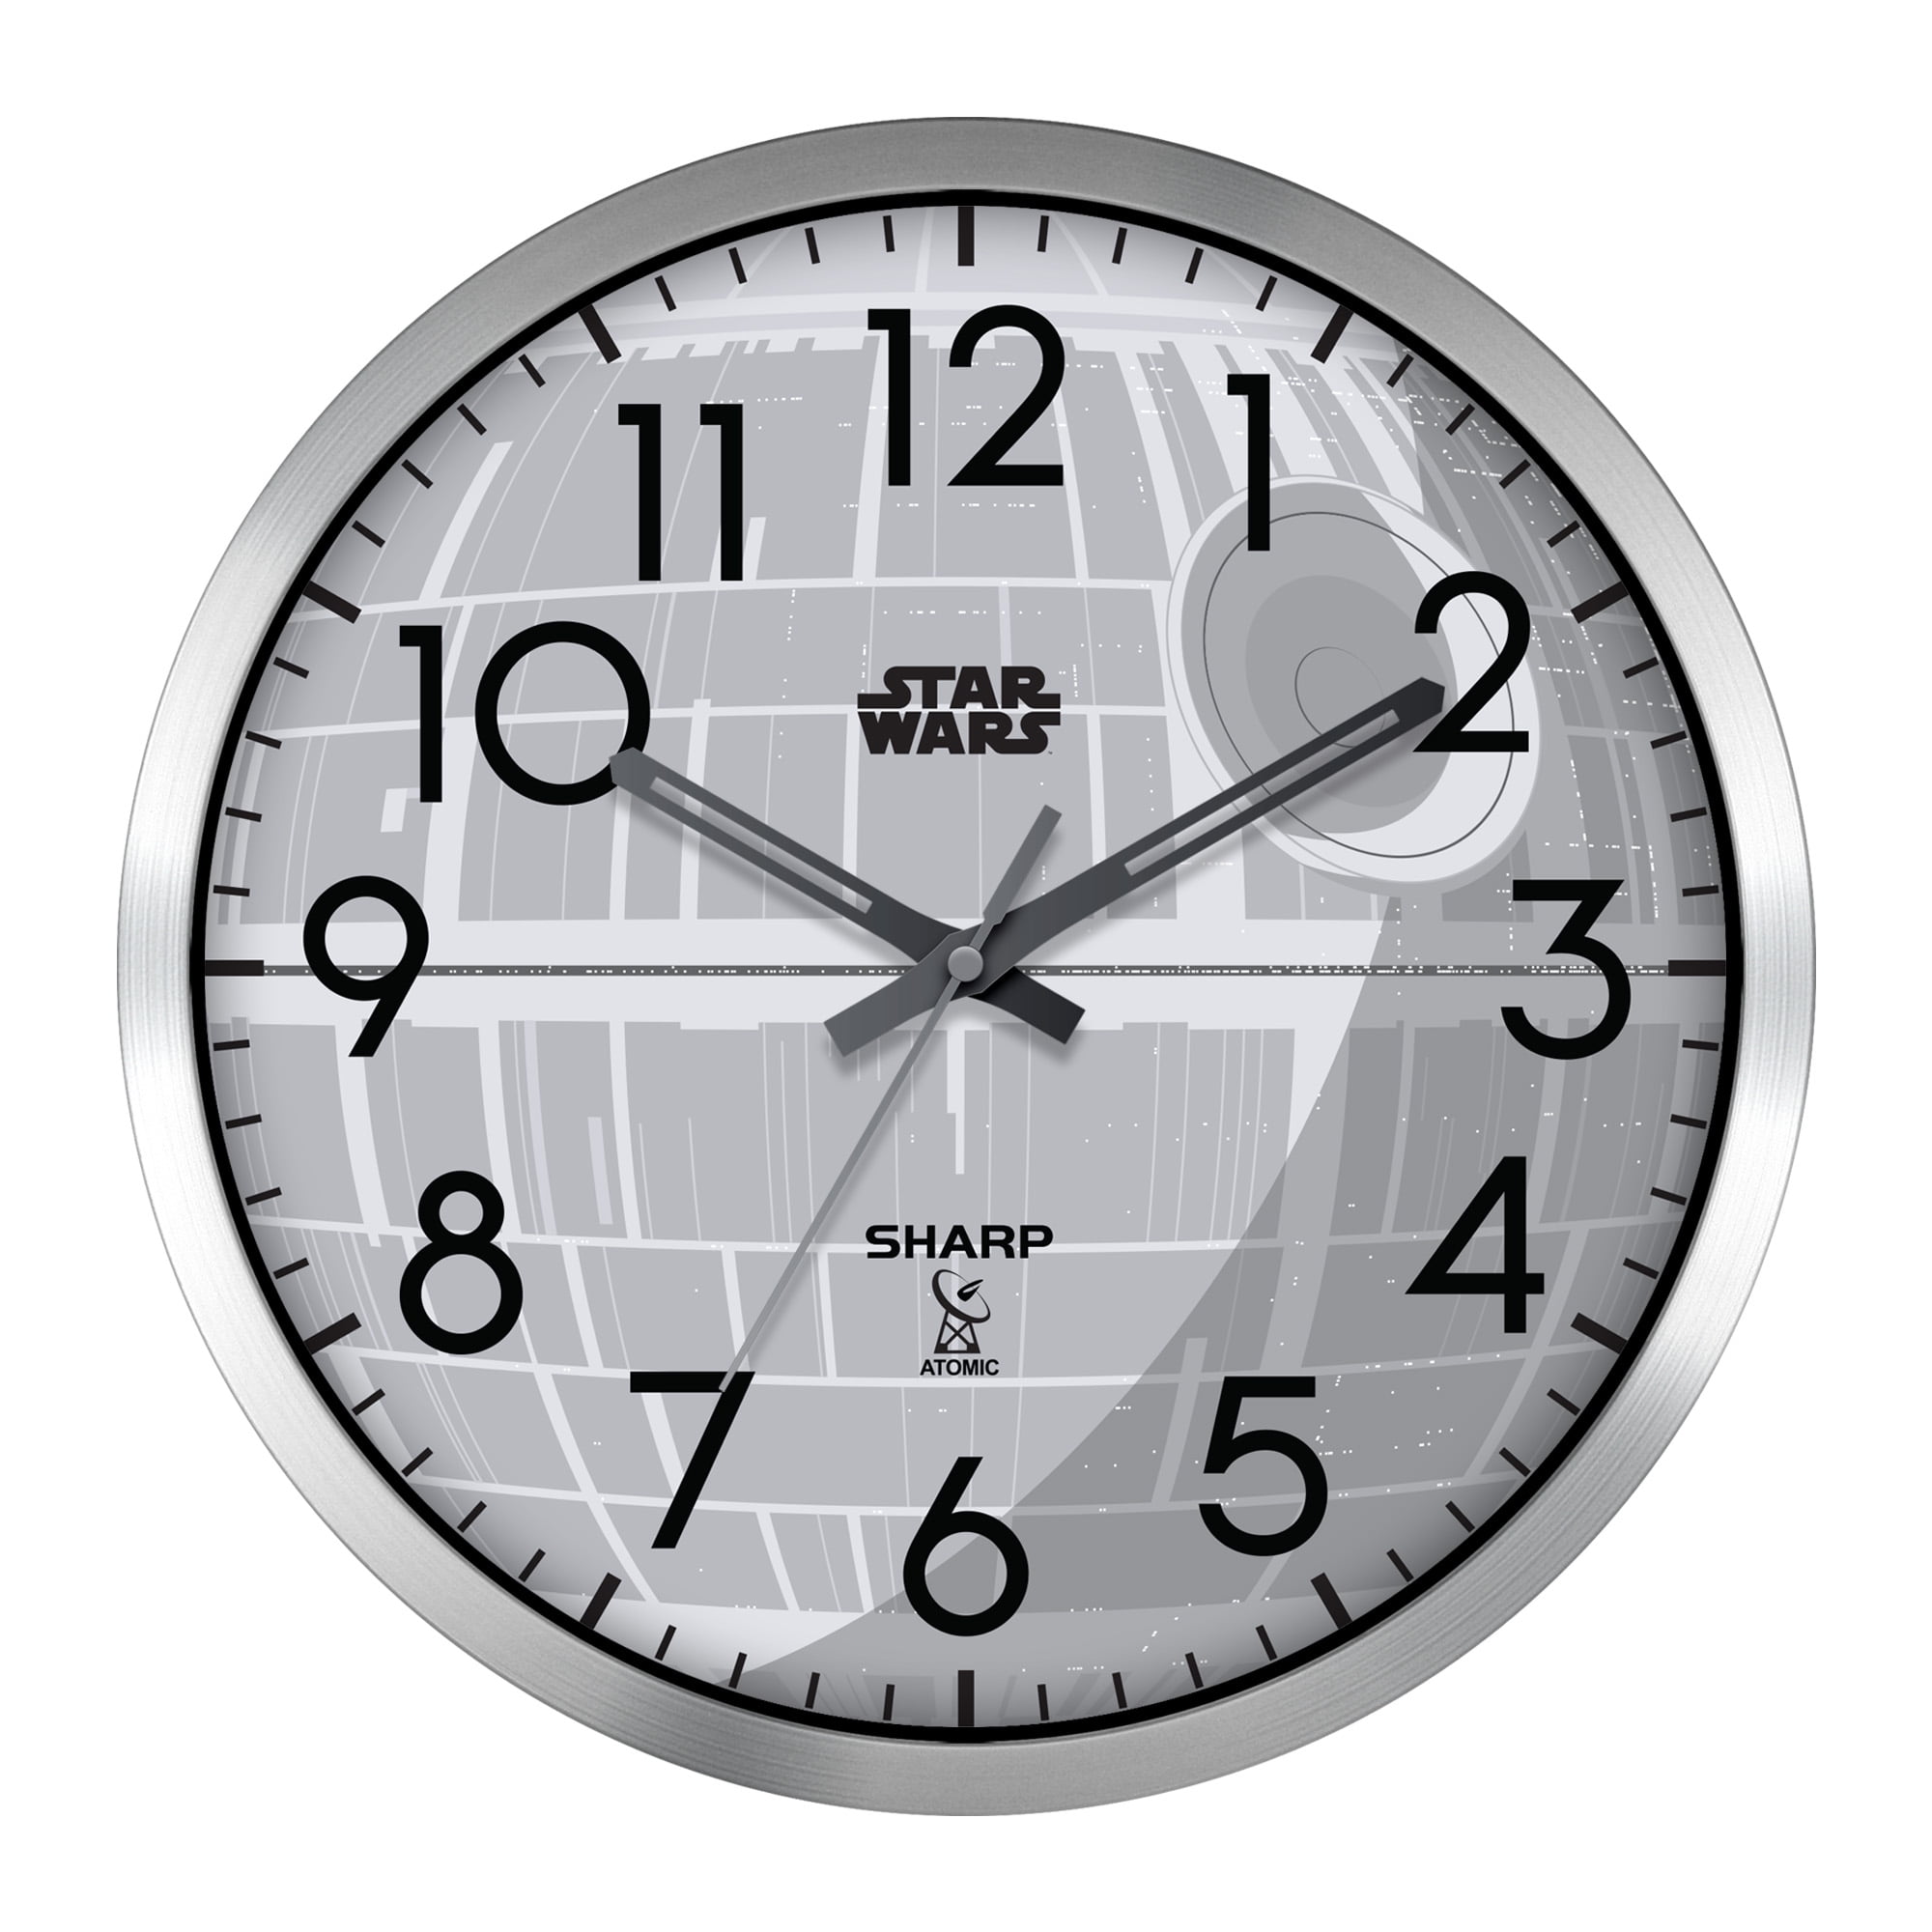 Sharp Star Wars Death Star Atomic Wall Clock- 12" Silver Brushed Finish - Sets Automatically- Battery Operated QA Technology Display -